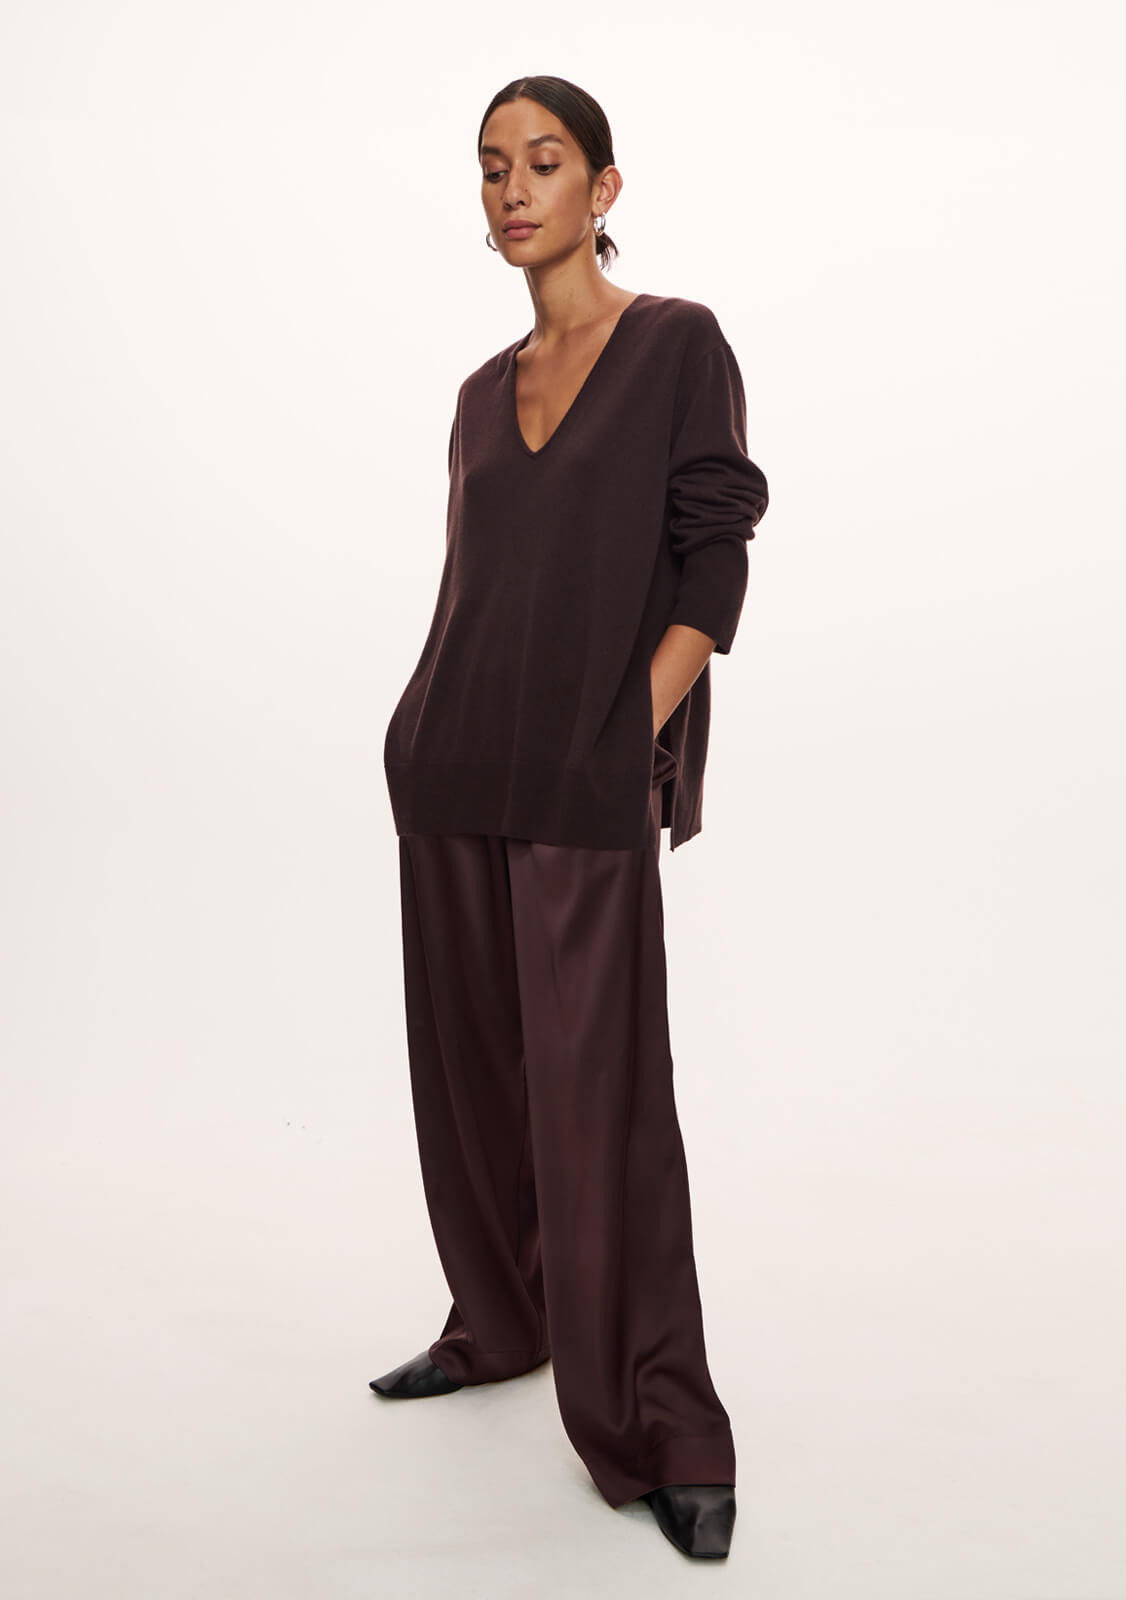 Esse Studios Gathered Pants in Chocolate Brown from The New Trend